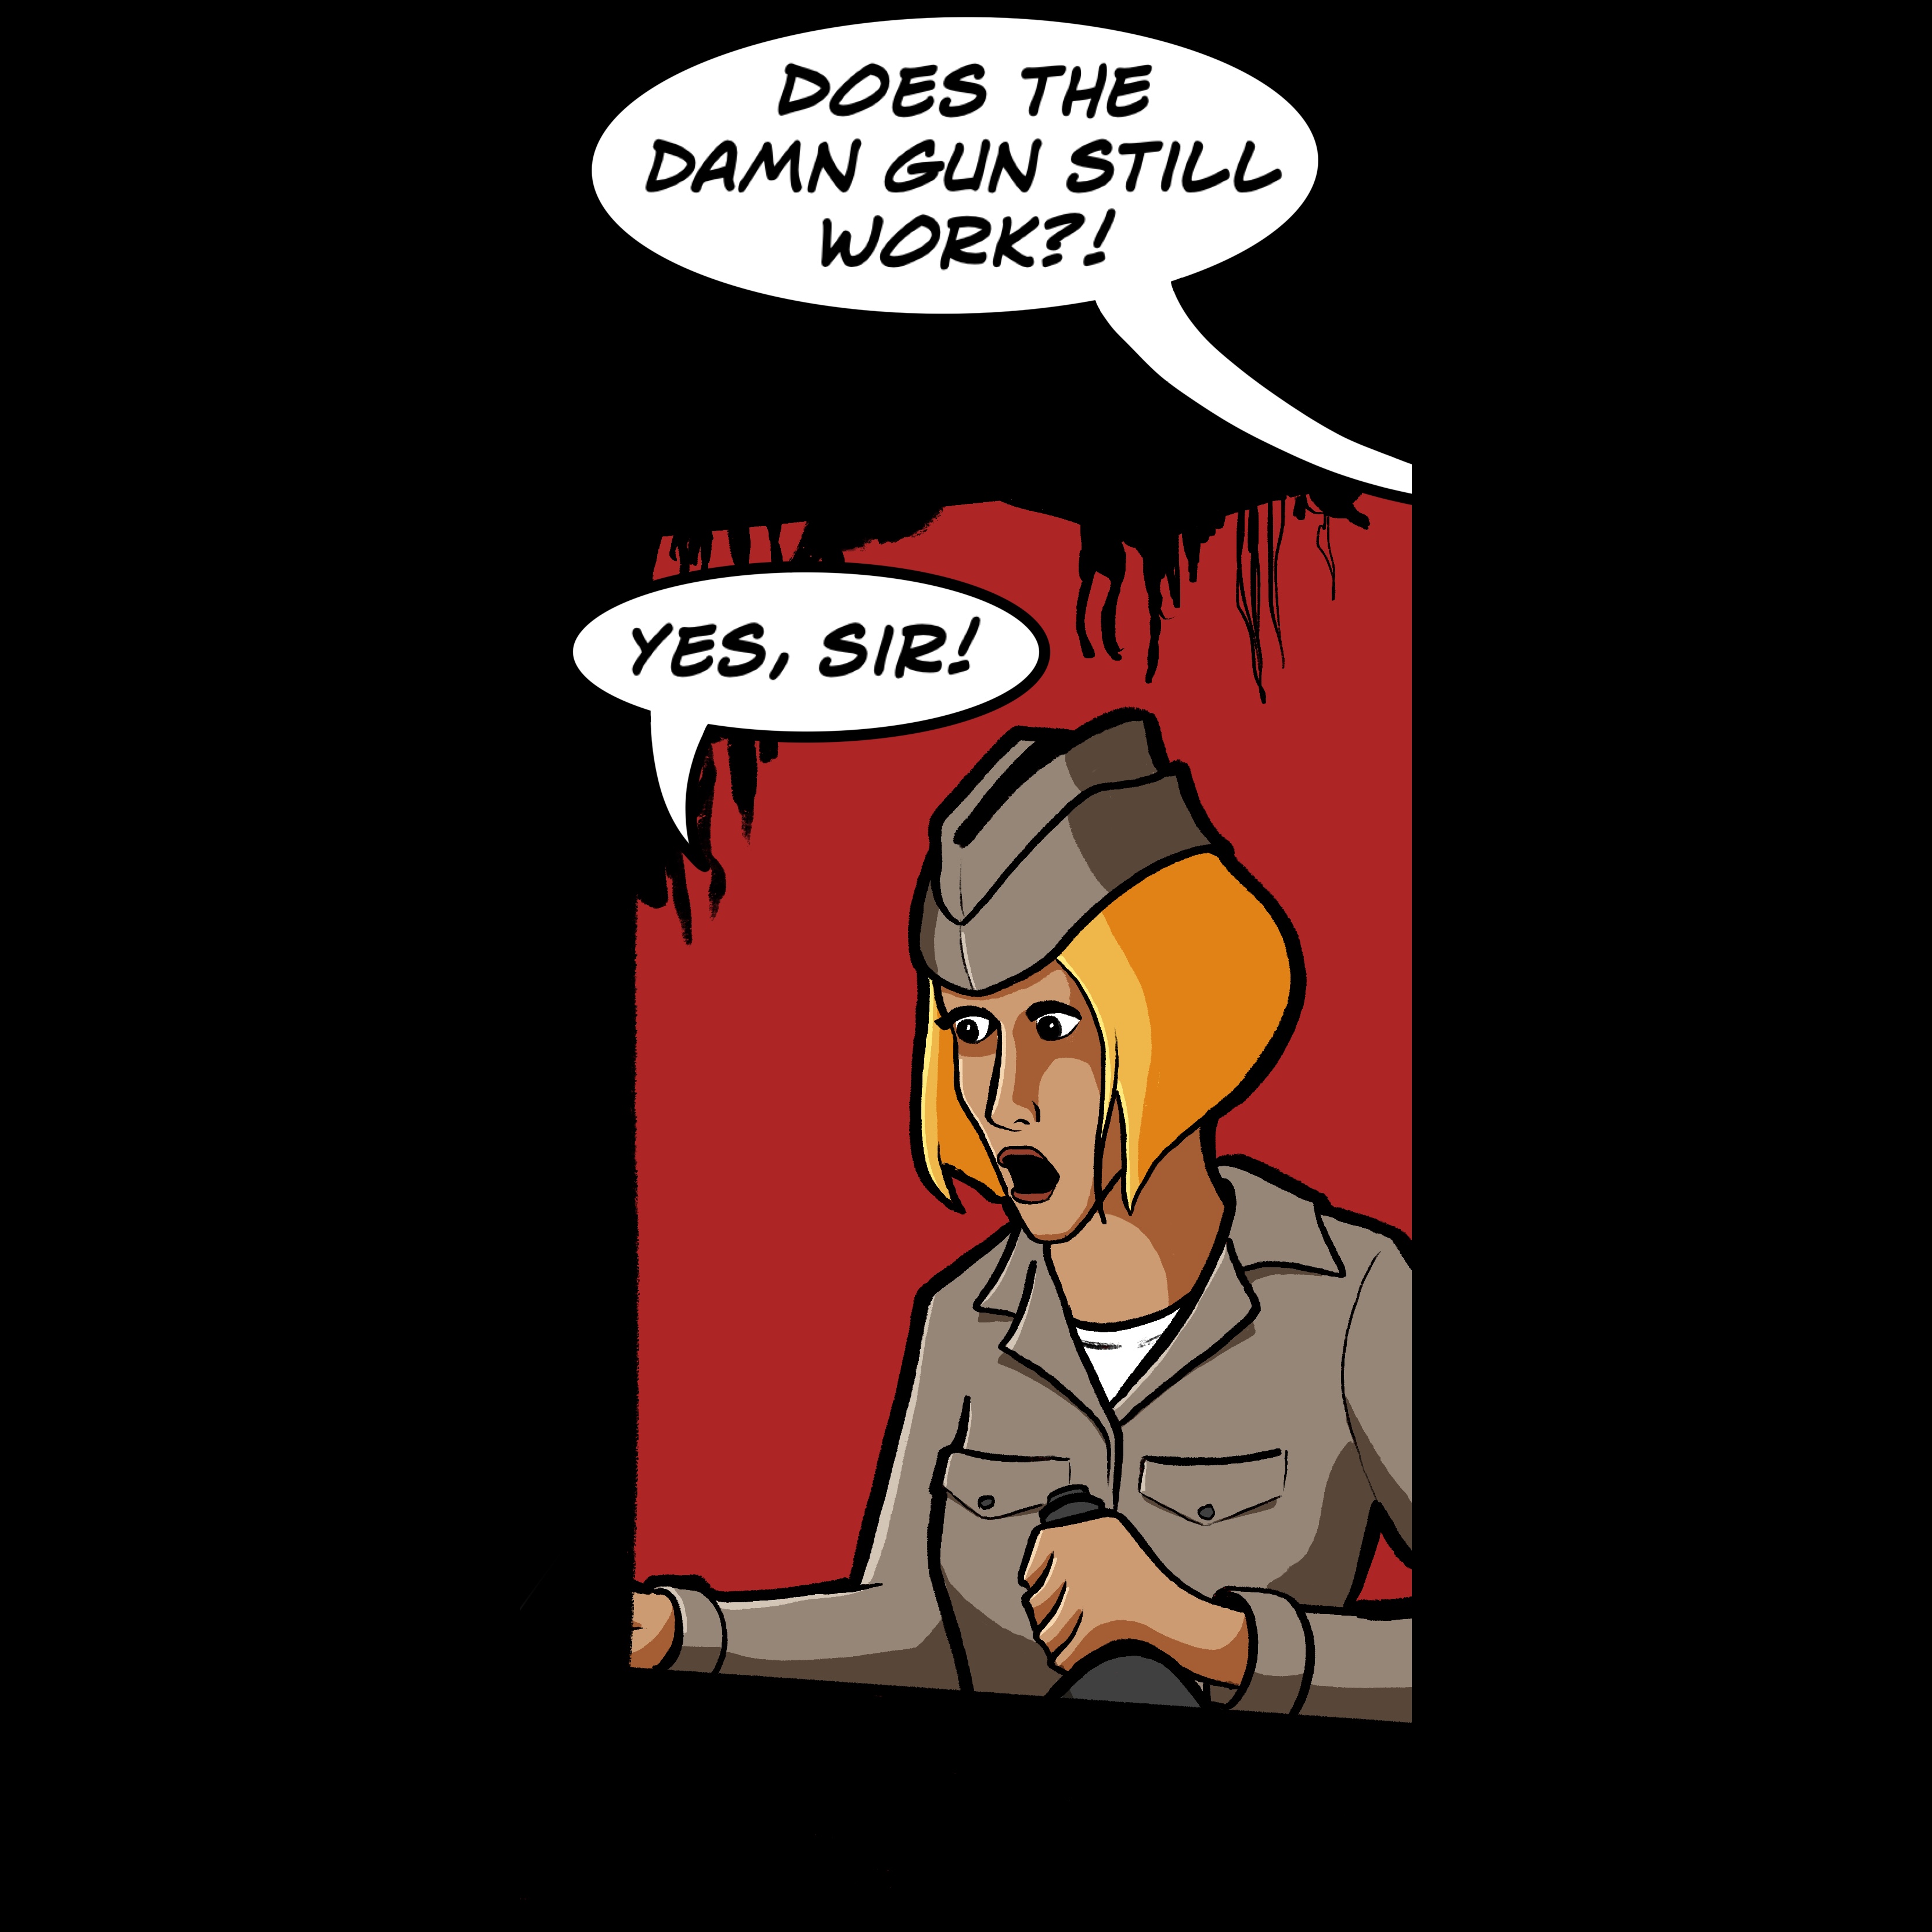 Panel 2 of my Swivel Turret intro comic. The Lieutenant is looking very concerned. From off-screen the commander is asking 'Does the damn gun still work', to which the Lieutenant replies 'Yes, Sir!'